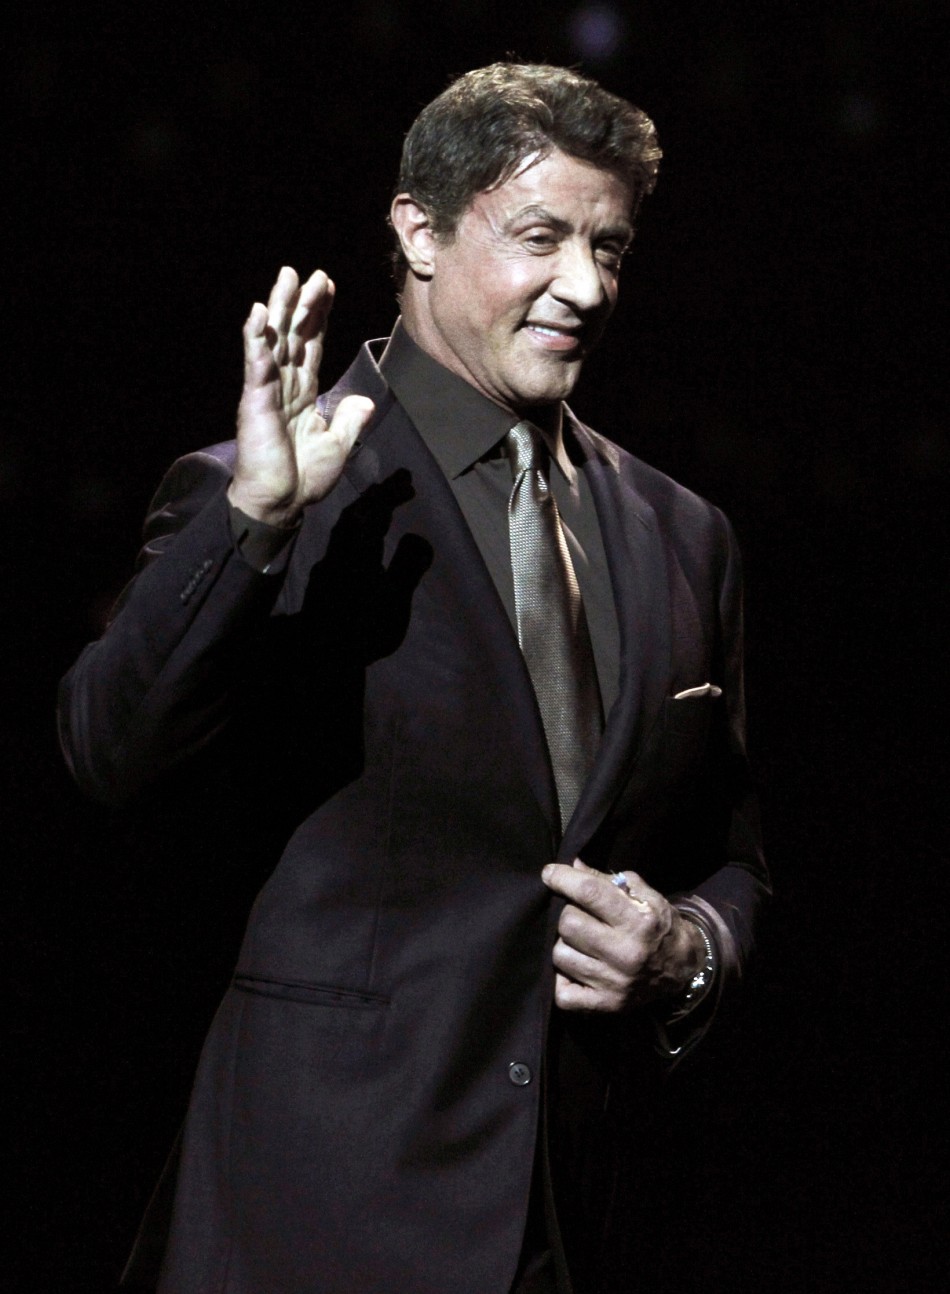 Actor Sylvester Stallone, recipient of the Career Achievement Award, arrives on stage during the CinemaCon Big Screen Achievement Awards show in Las Vegas